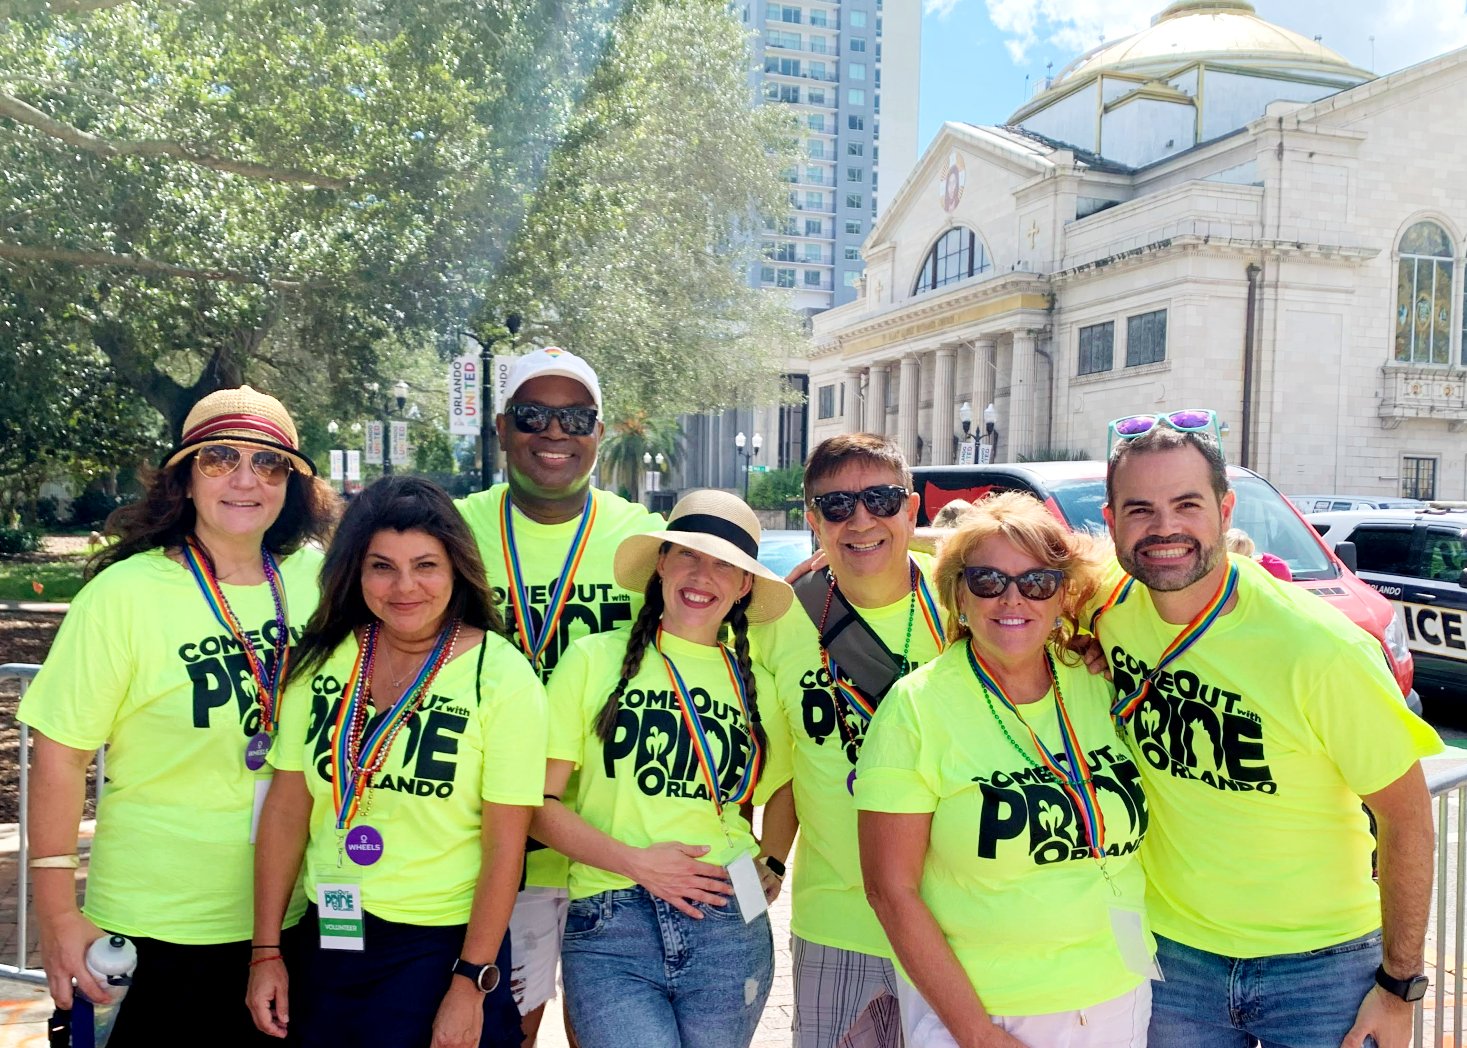 Visit Orlando staff volunteering at Come Out With Pride 